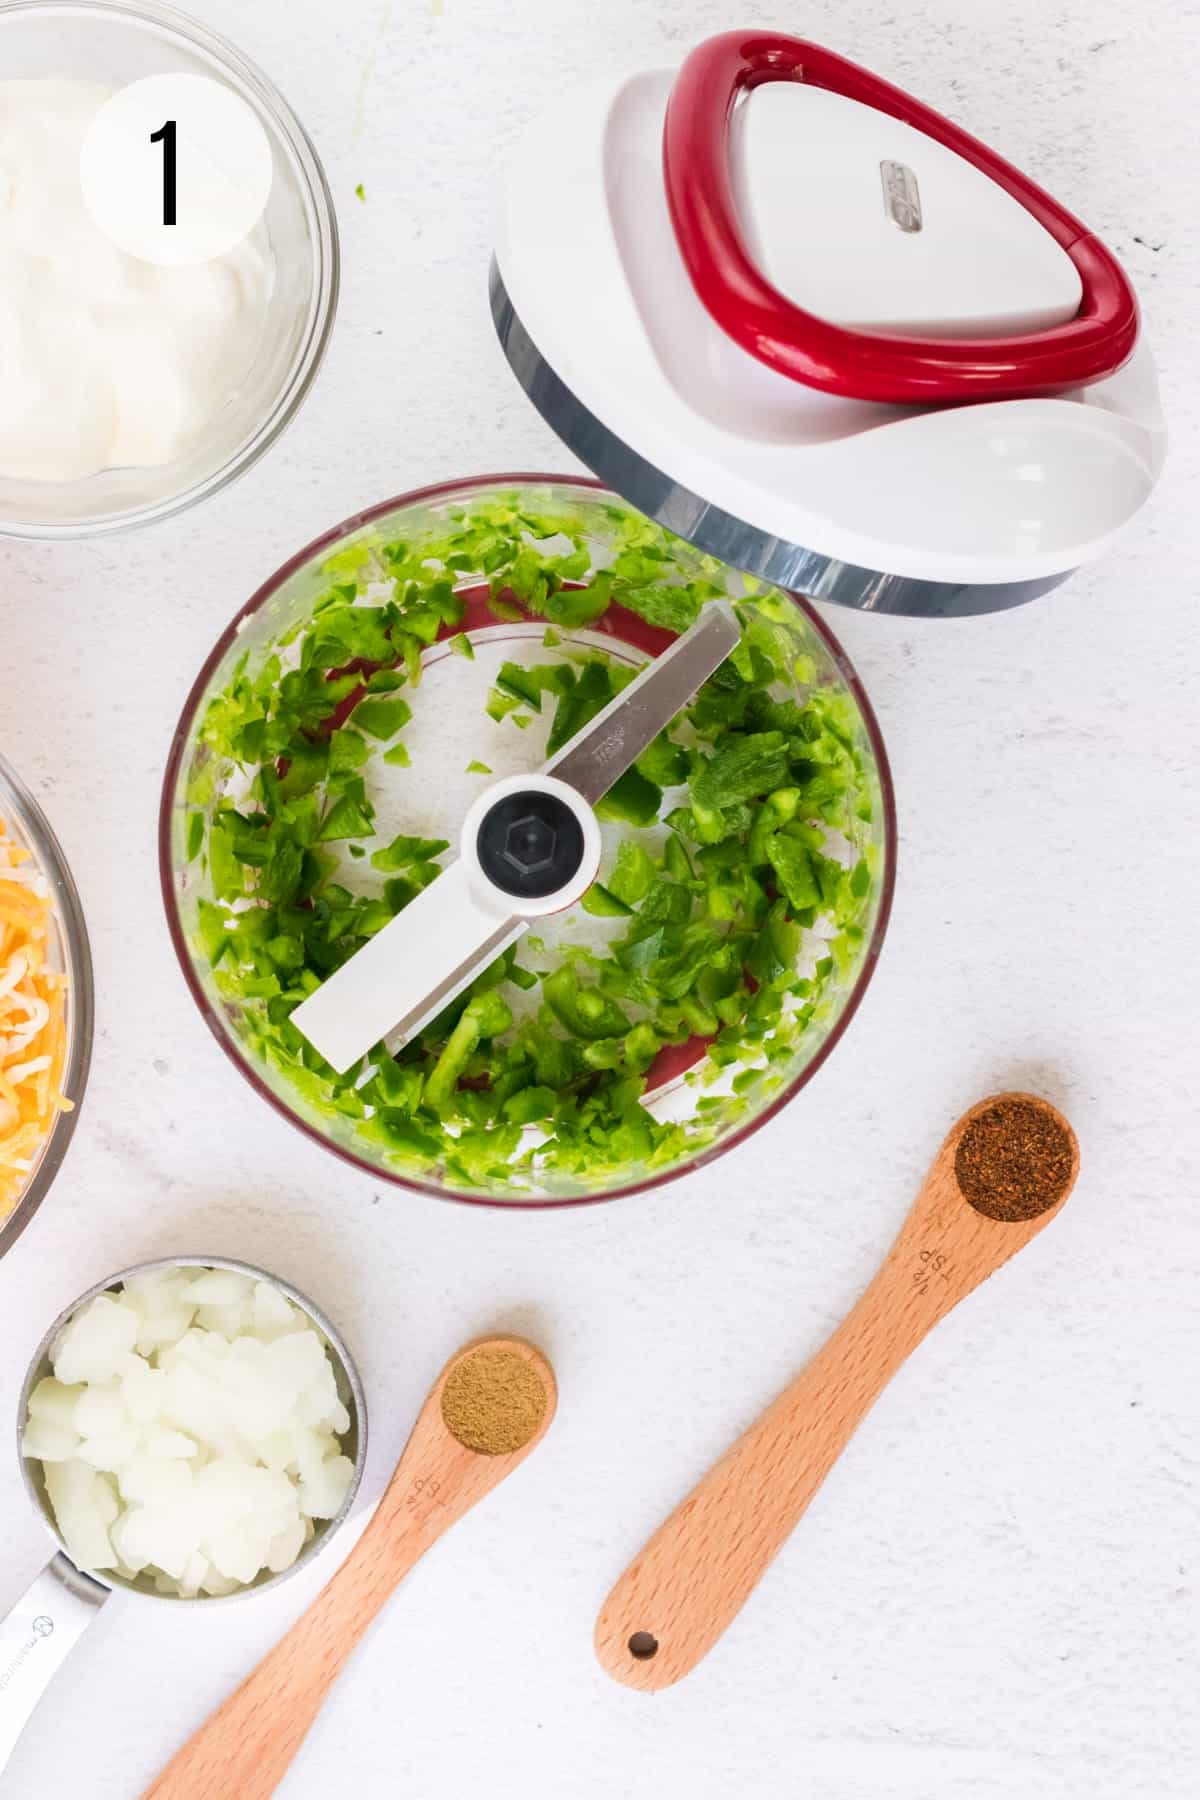 Red and white handheld food chopper with diced jalapenos inside and chopped onions, cumin and chili powder measuring cup and spoons in lower foreground.